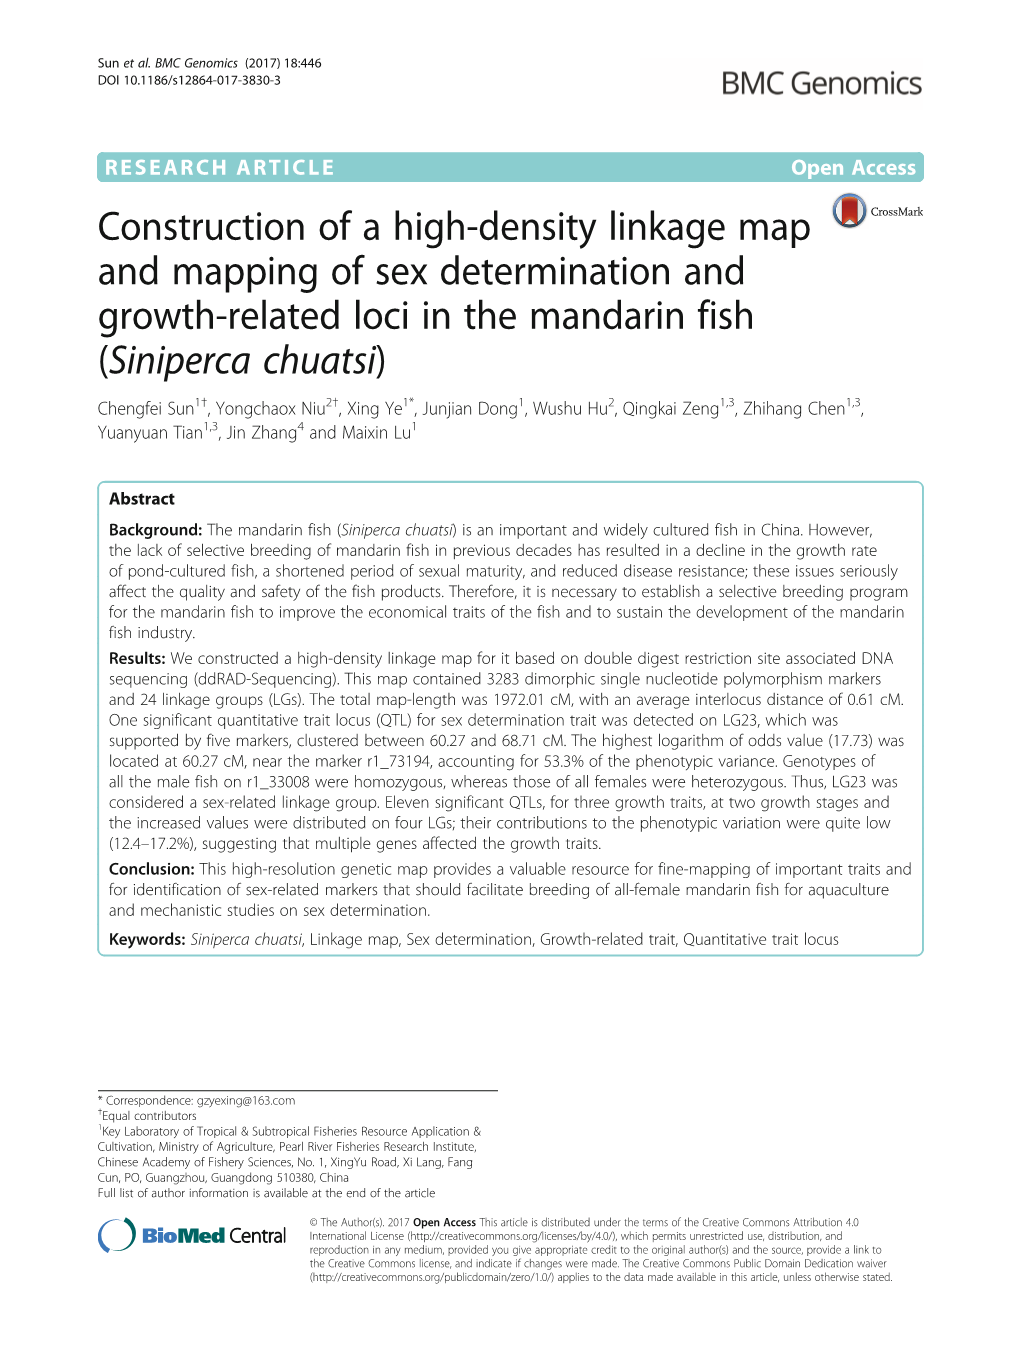 Construction of a High-Density Linkage Map and Mapping